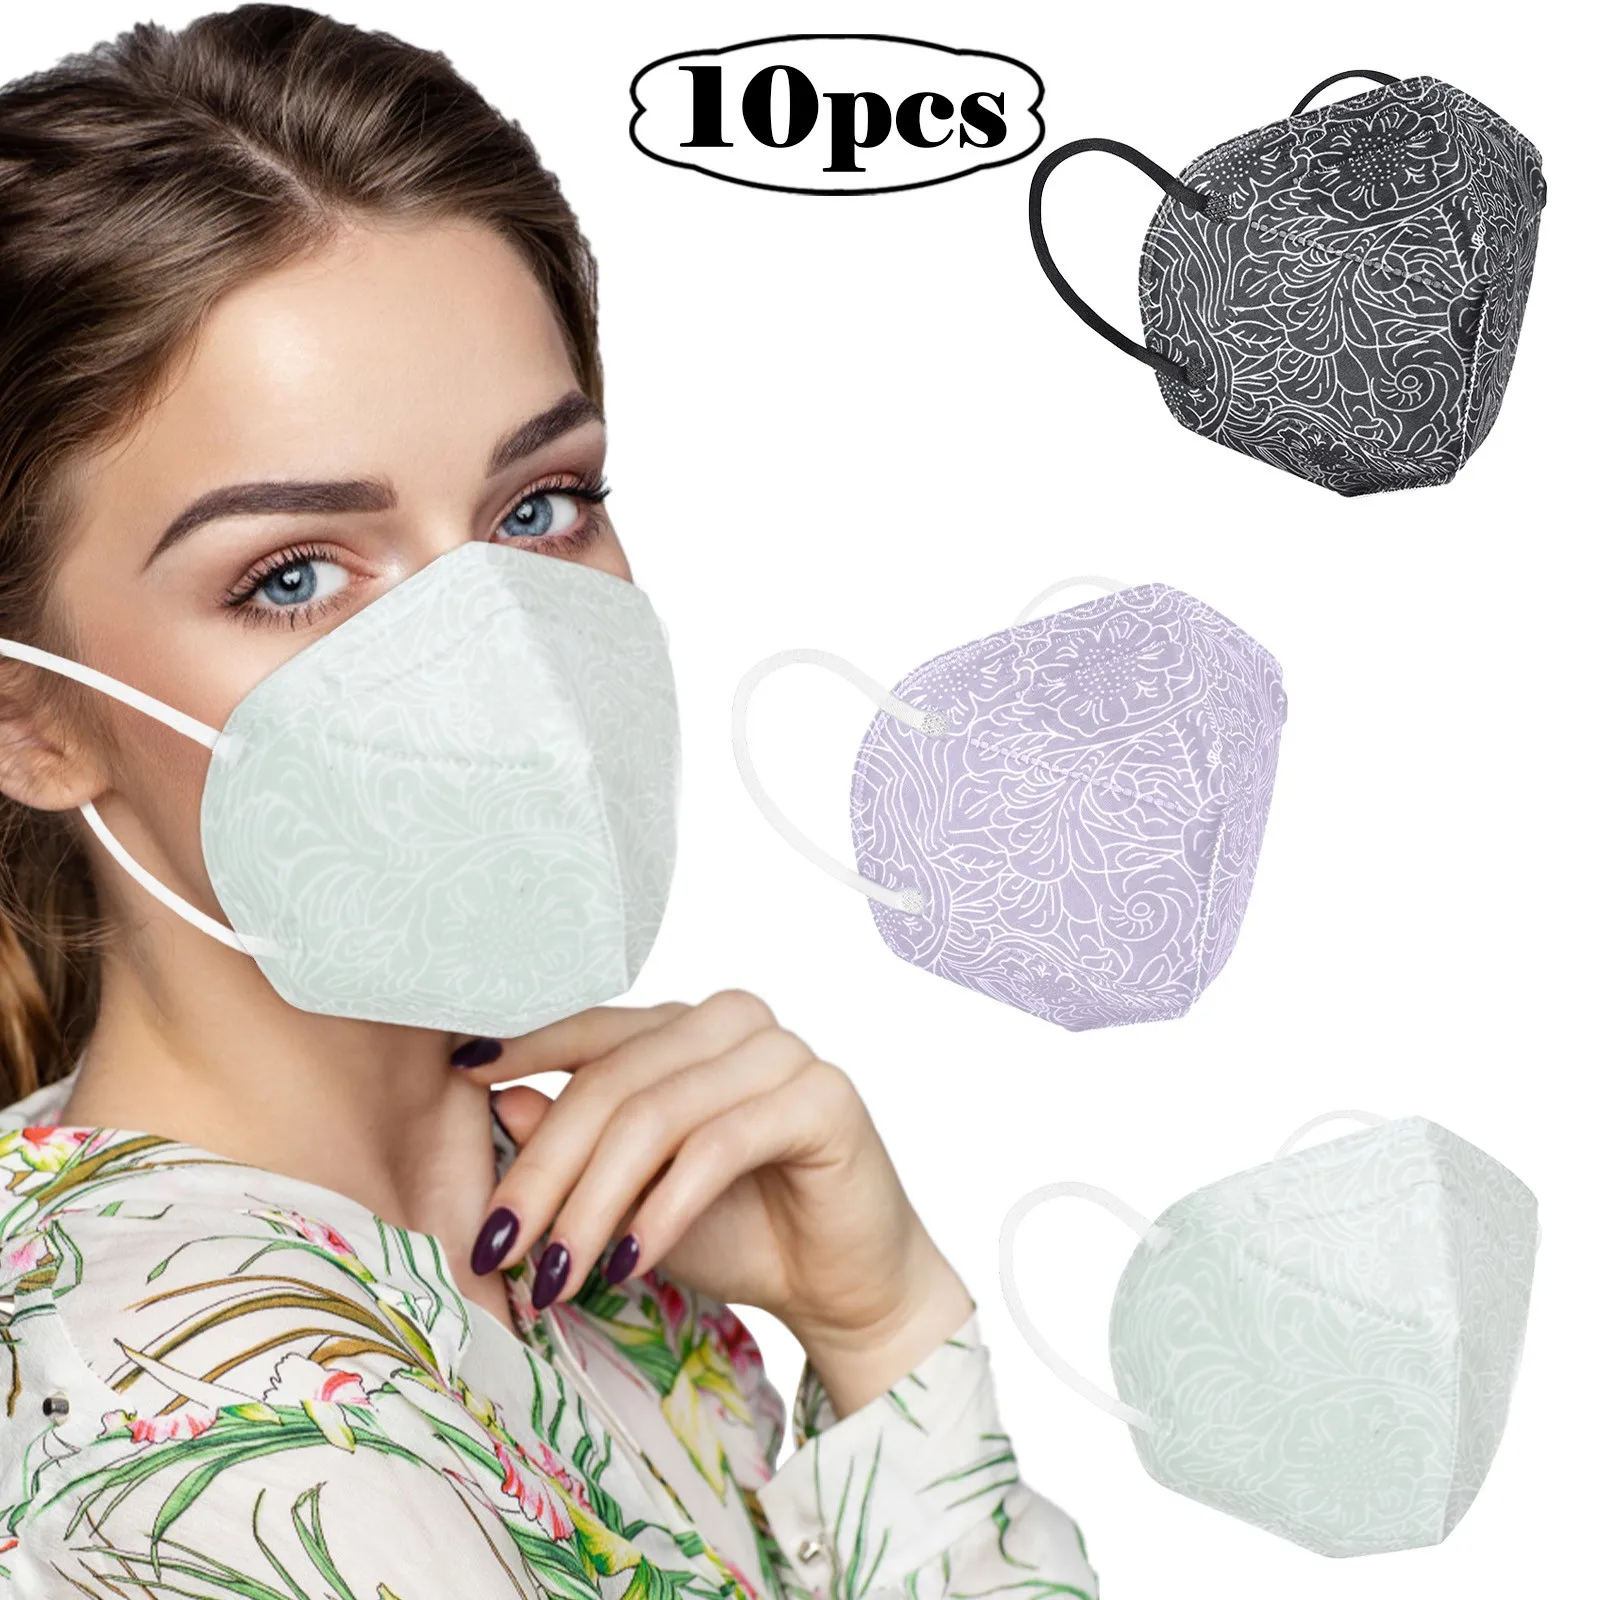 

Fog Cosplay Bandana Texture Adult Mask Mask Sketch Flower Anti-pollution Anti-wind Filter Five-layer 10pc High-density Pm2.5